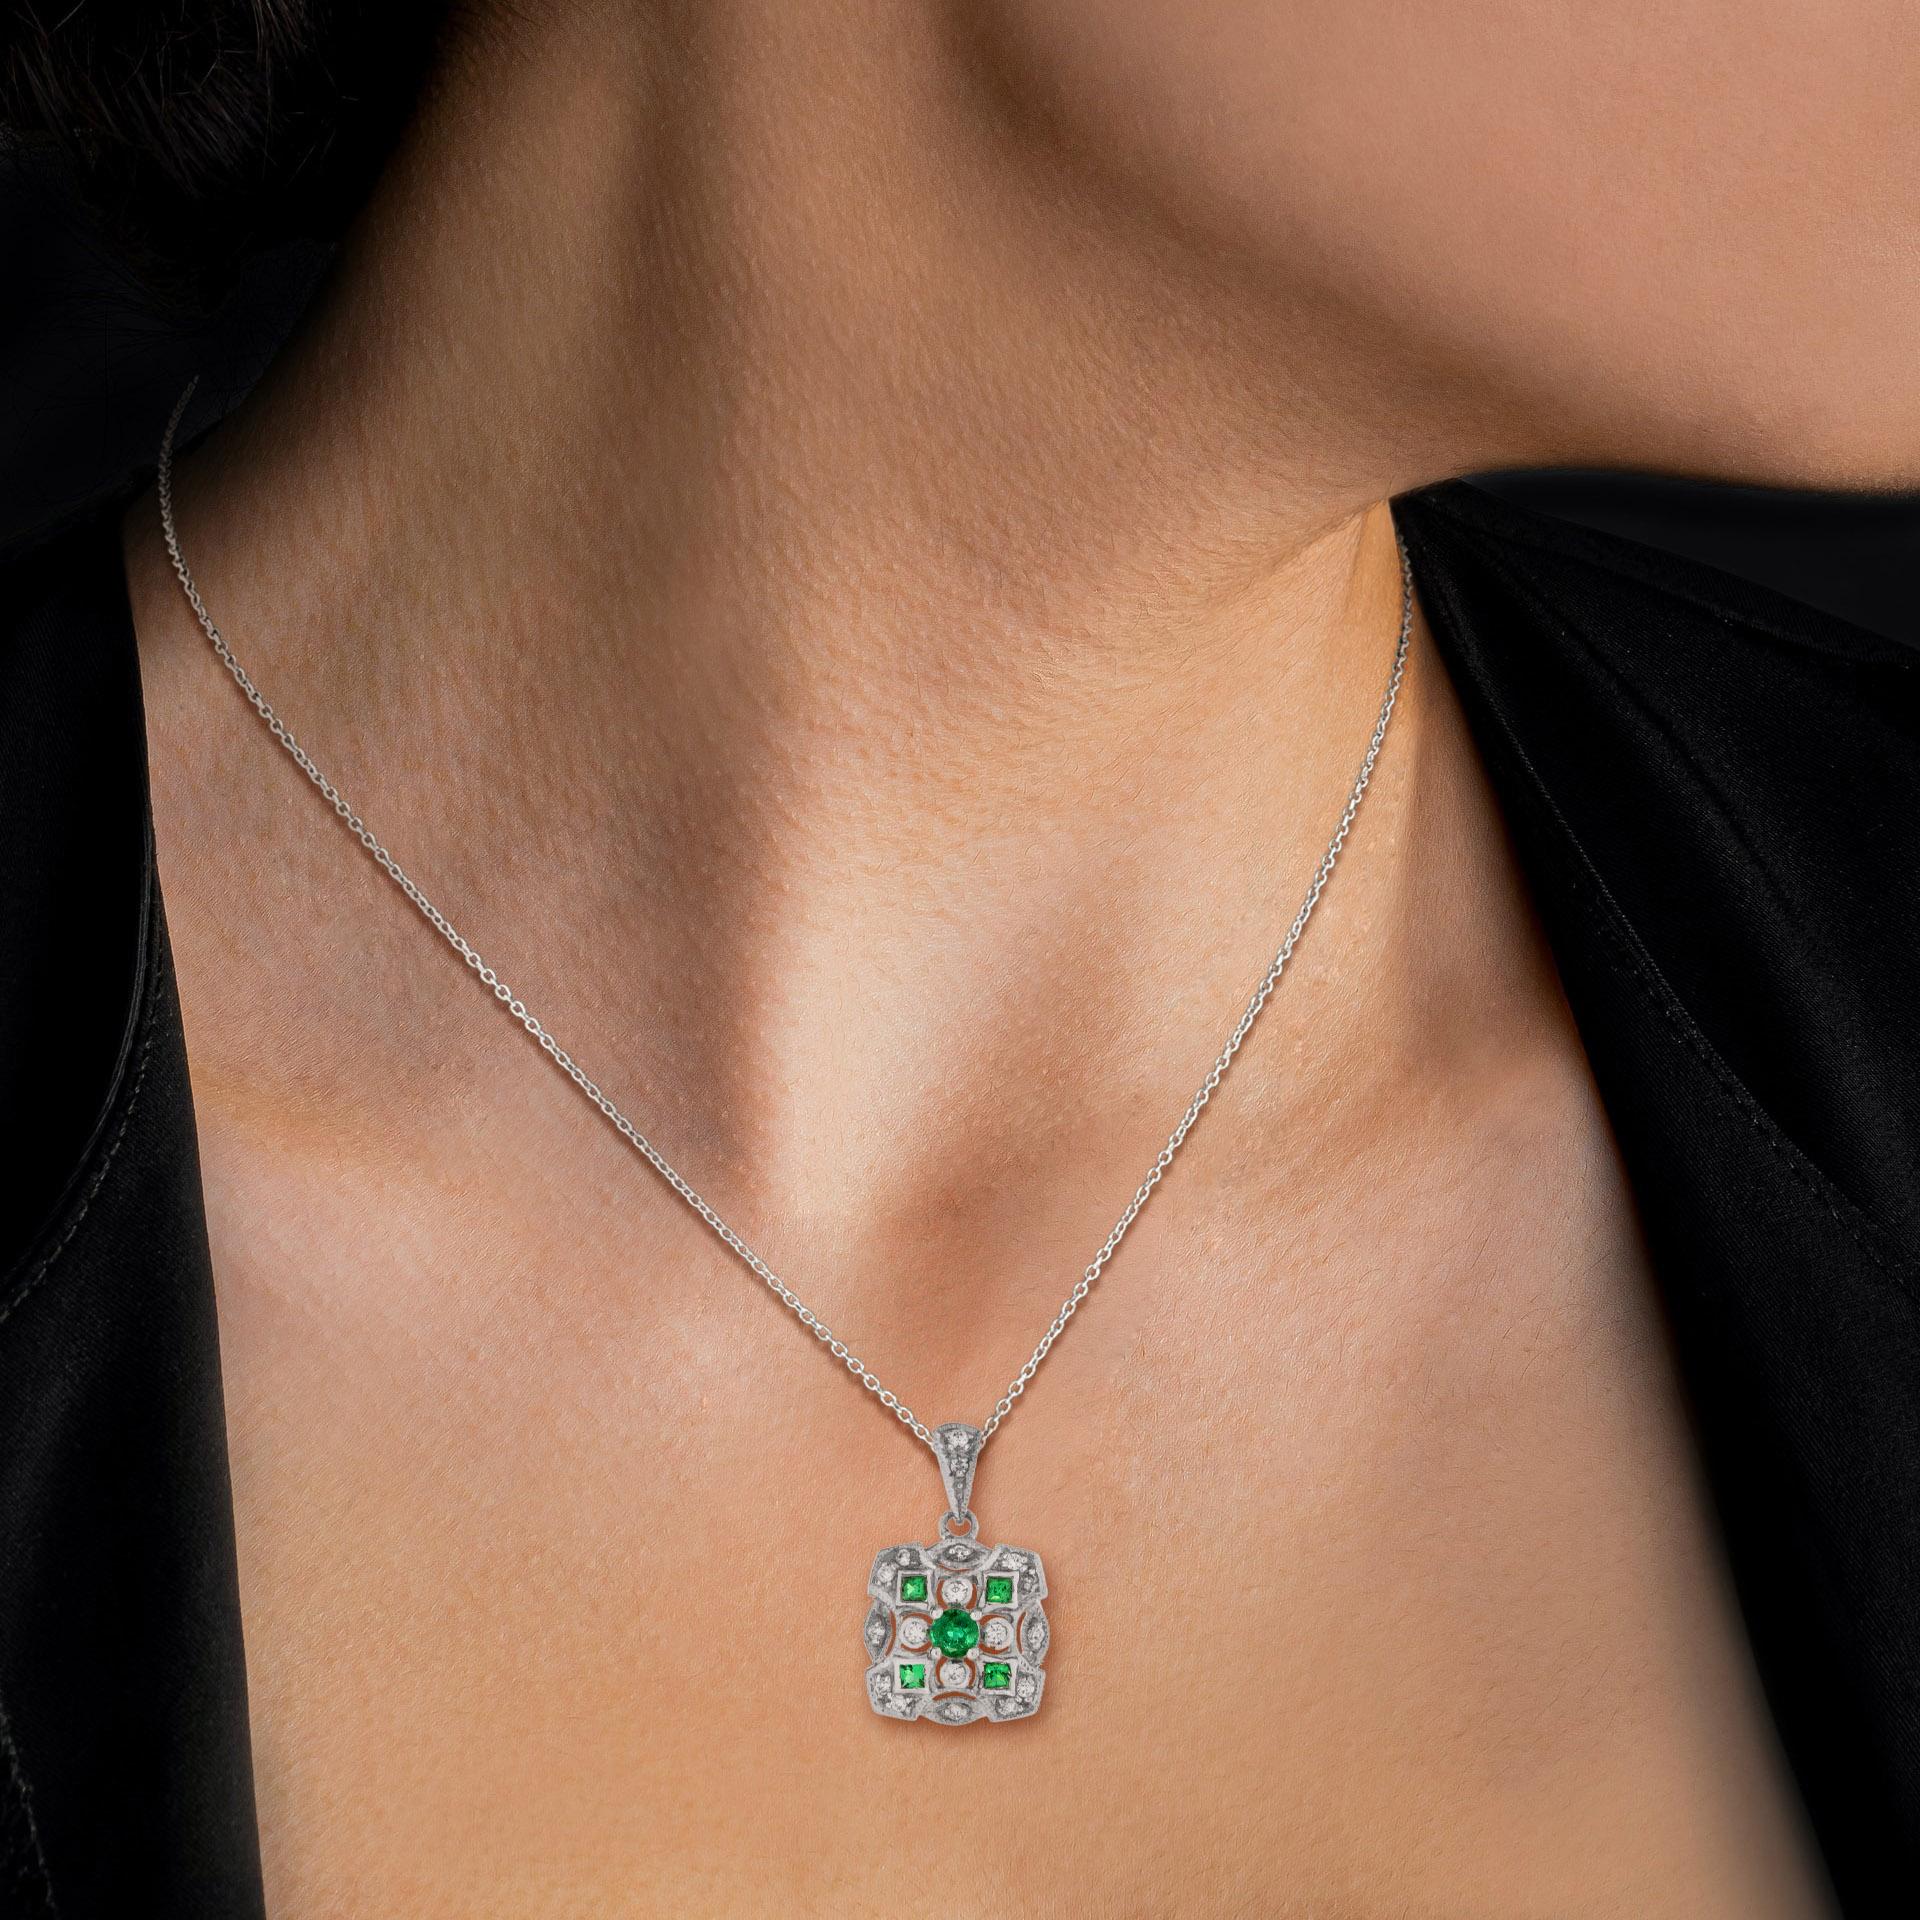 Art Deco style emerald and diamond square cluster pendant in 14k white gold. Centrally set with round emerald in prong setting, set to corners with emeralds in millgrain setting and further enhanced with round cut diamonds. 

Information
Metal: 14K